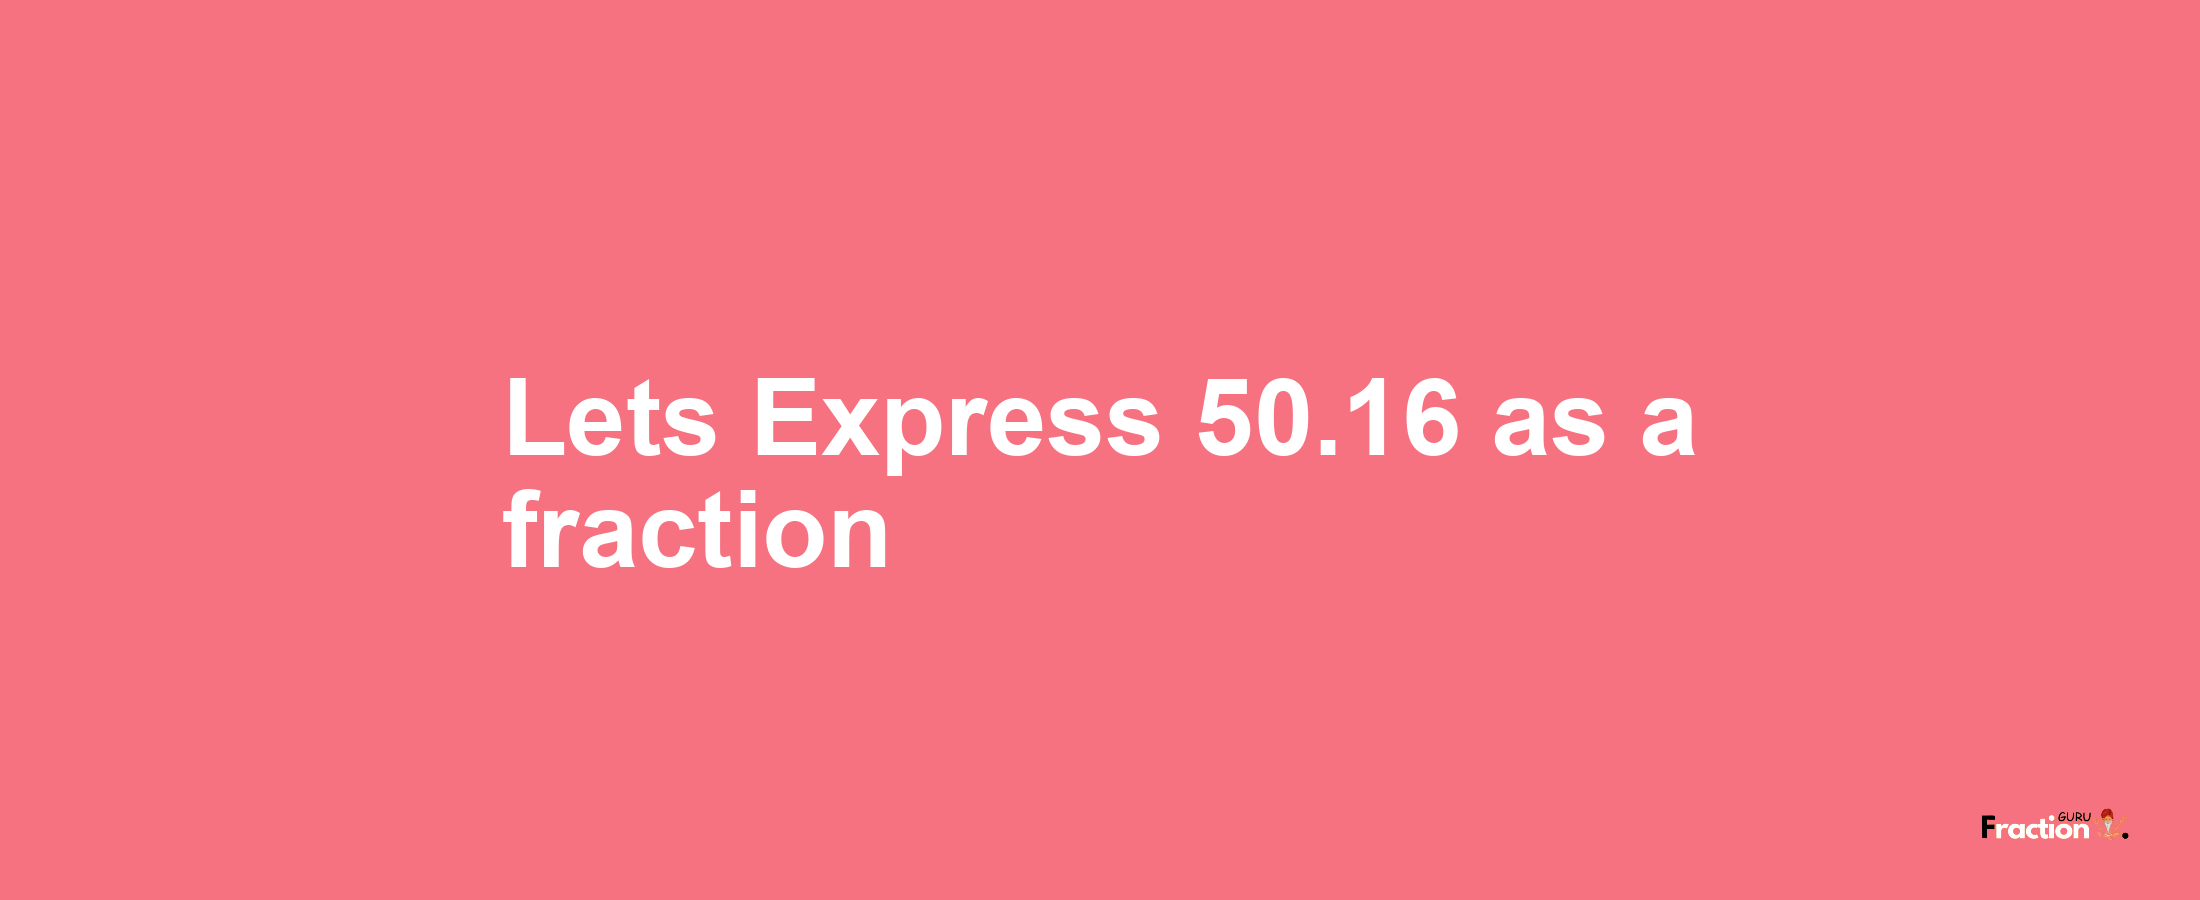 Lets Express 50.16 as afraction